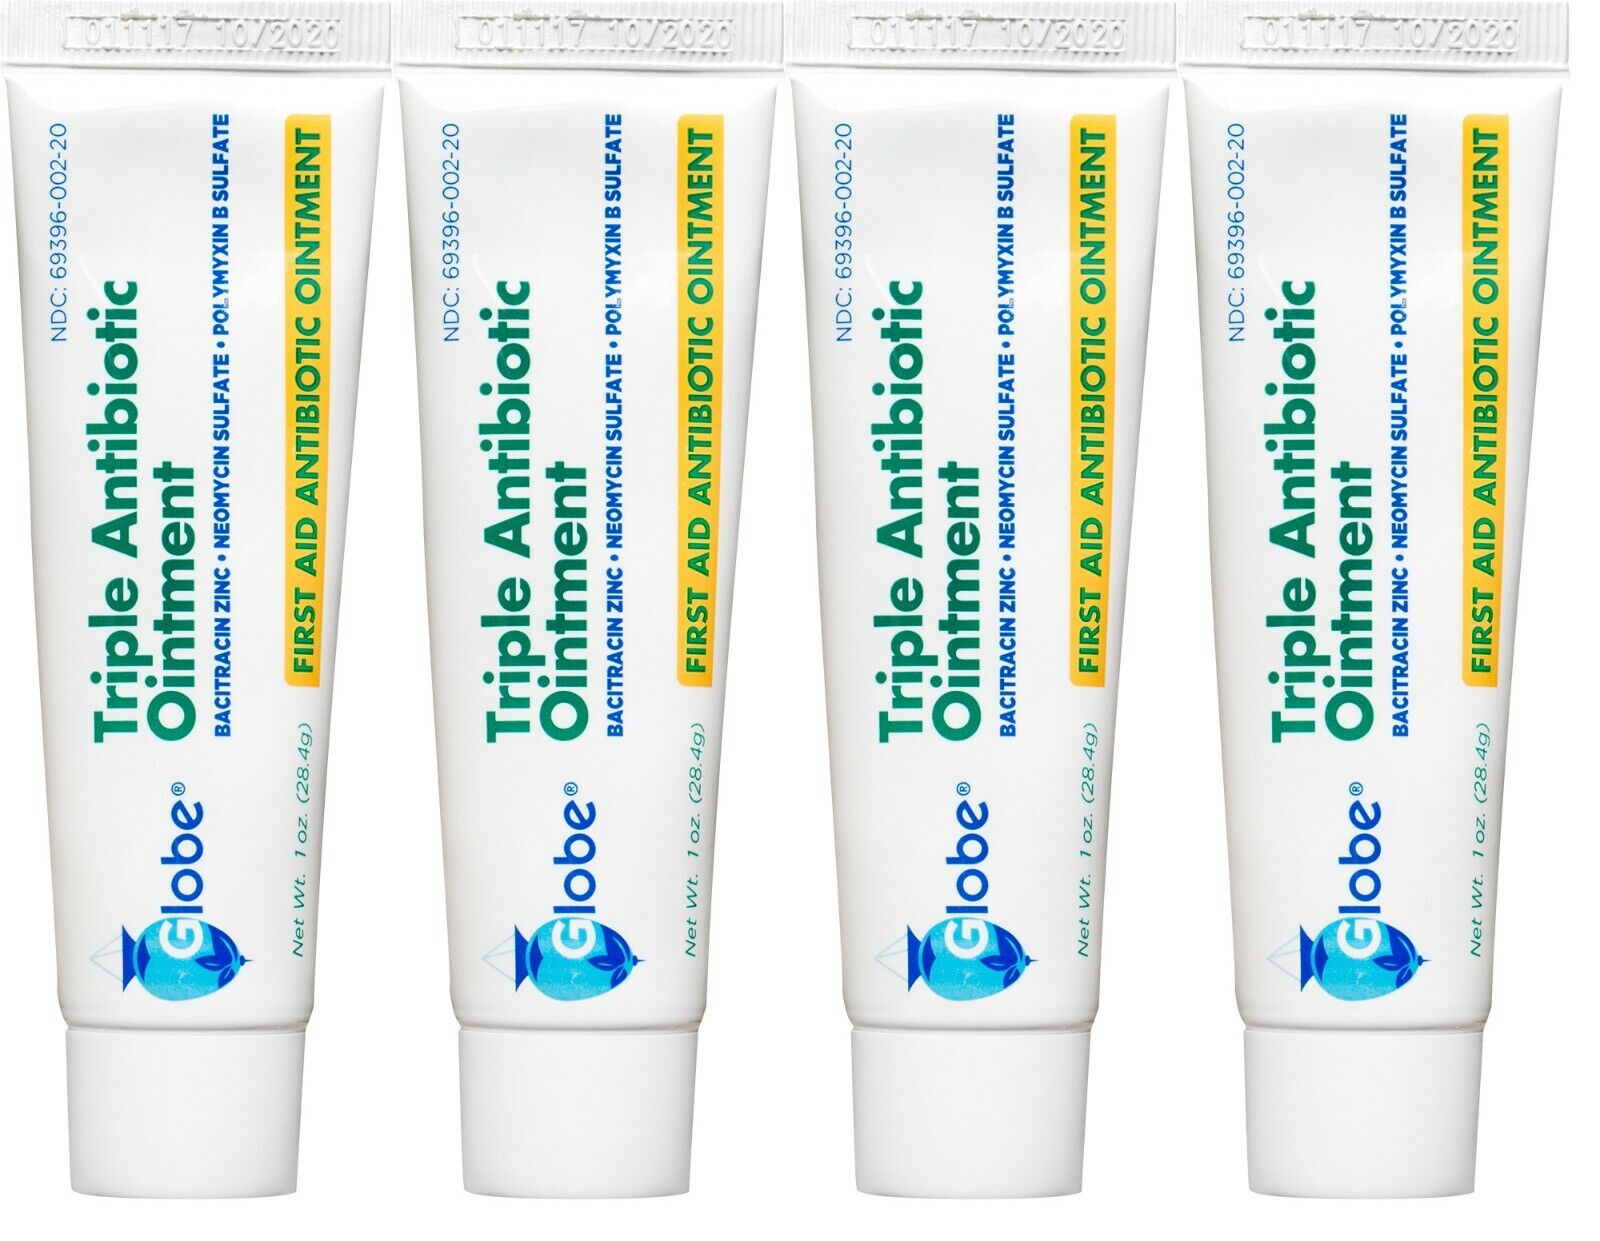 Globe Triple Antibiotic First Aid Ointment, 1 oz, Compare to Neosporin  *4 PACK